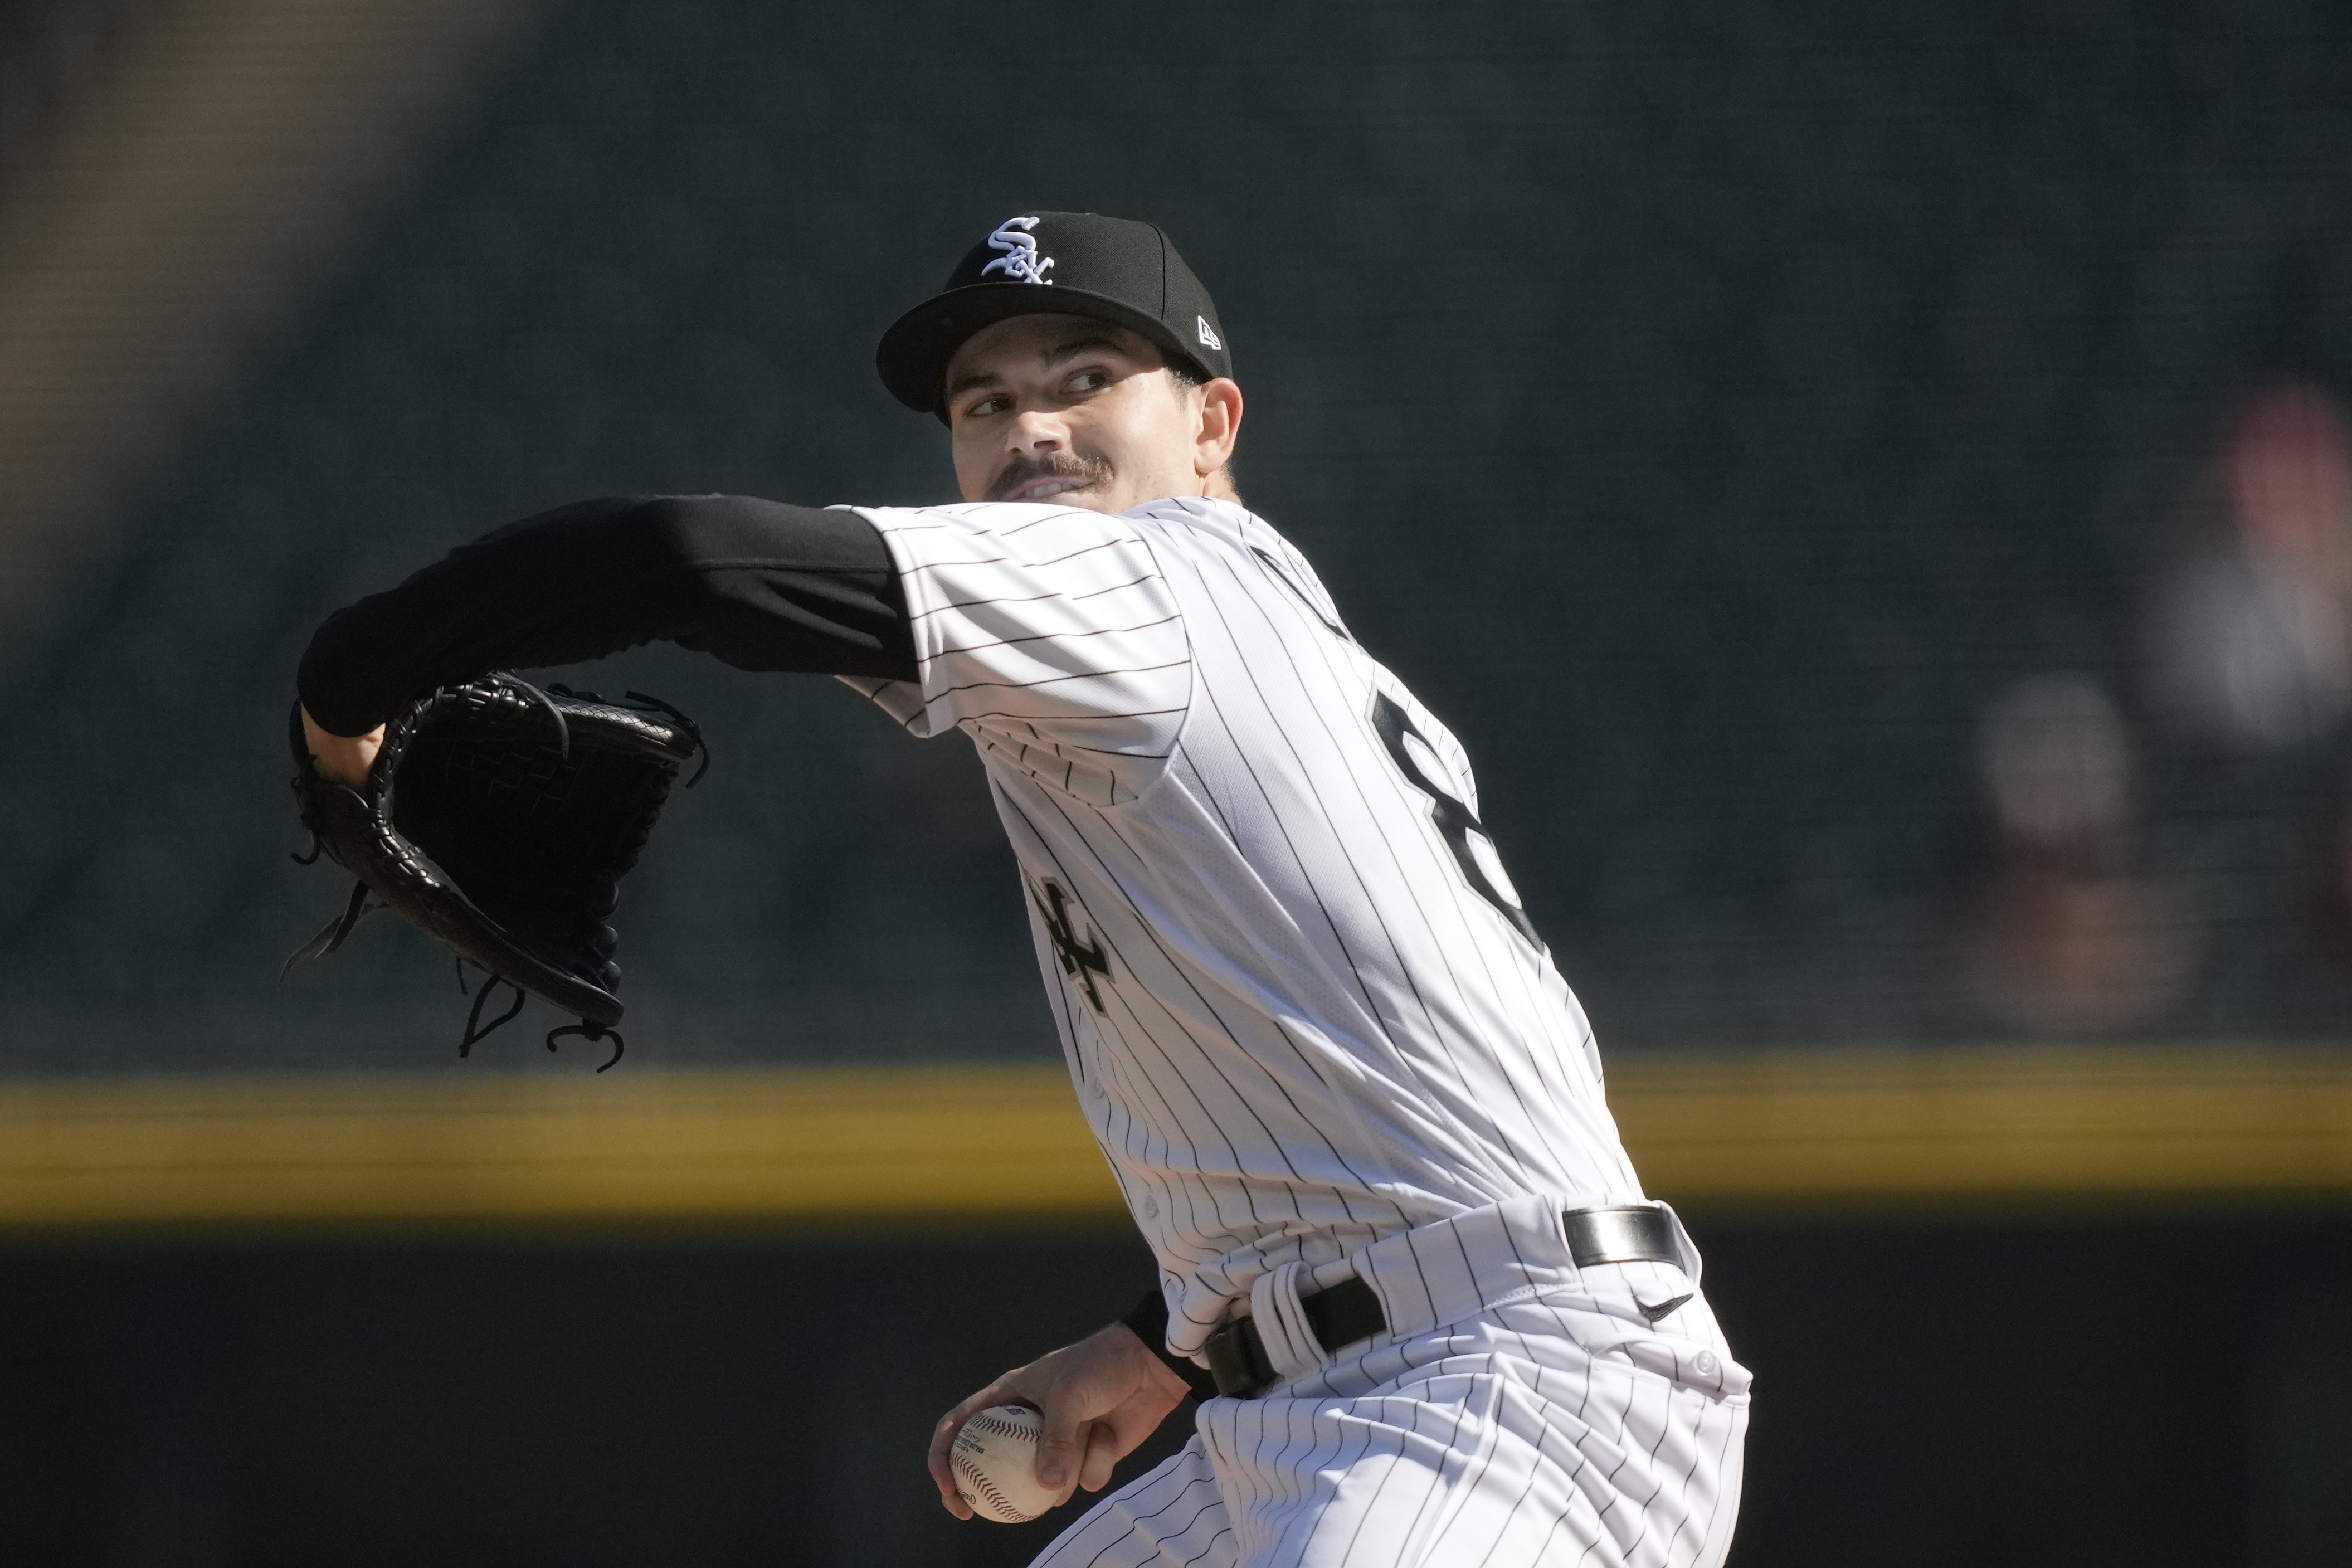 Dylan Cease Trusts His Stuff in Bounce-Back Performance vs. Royals